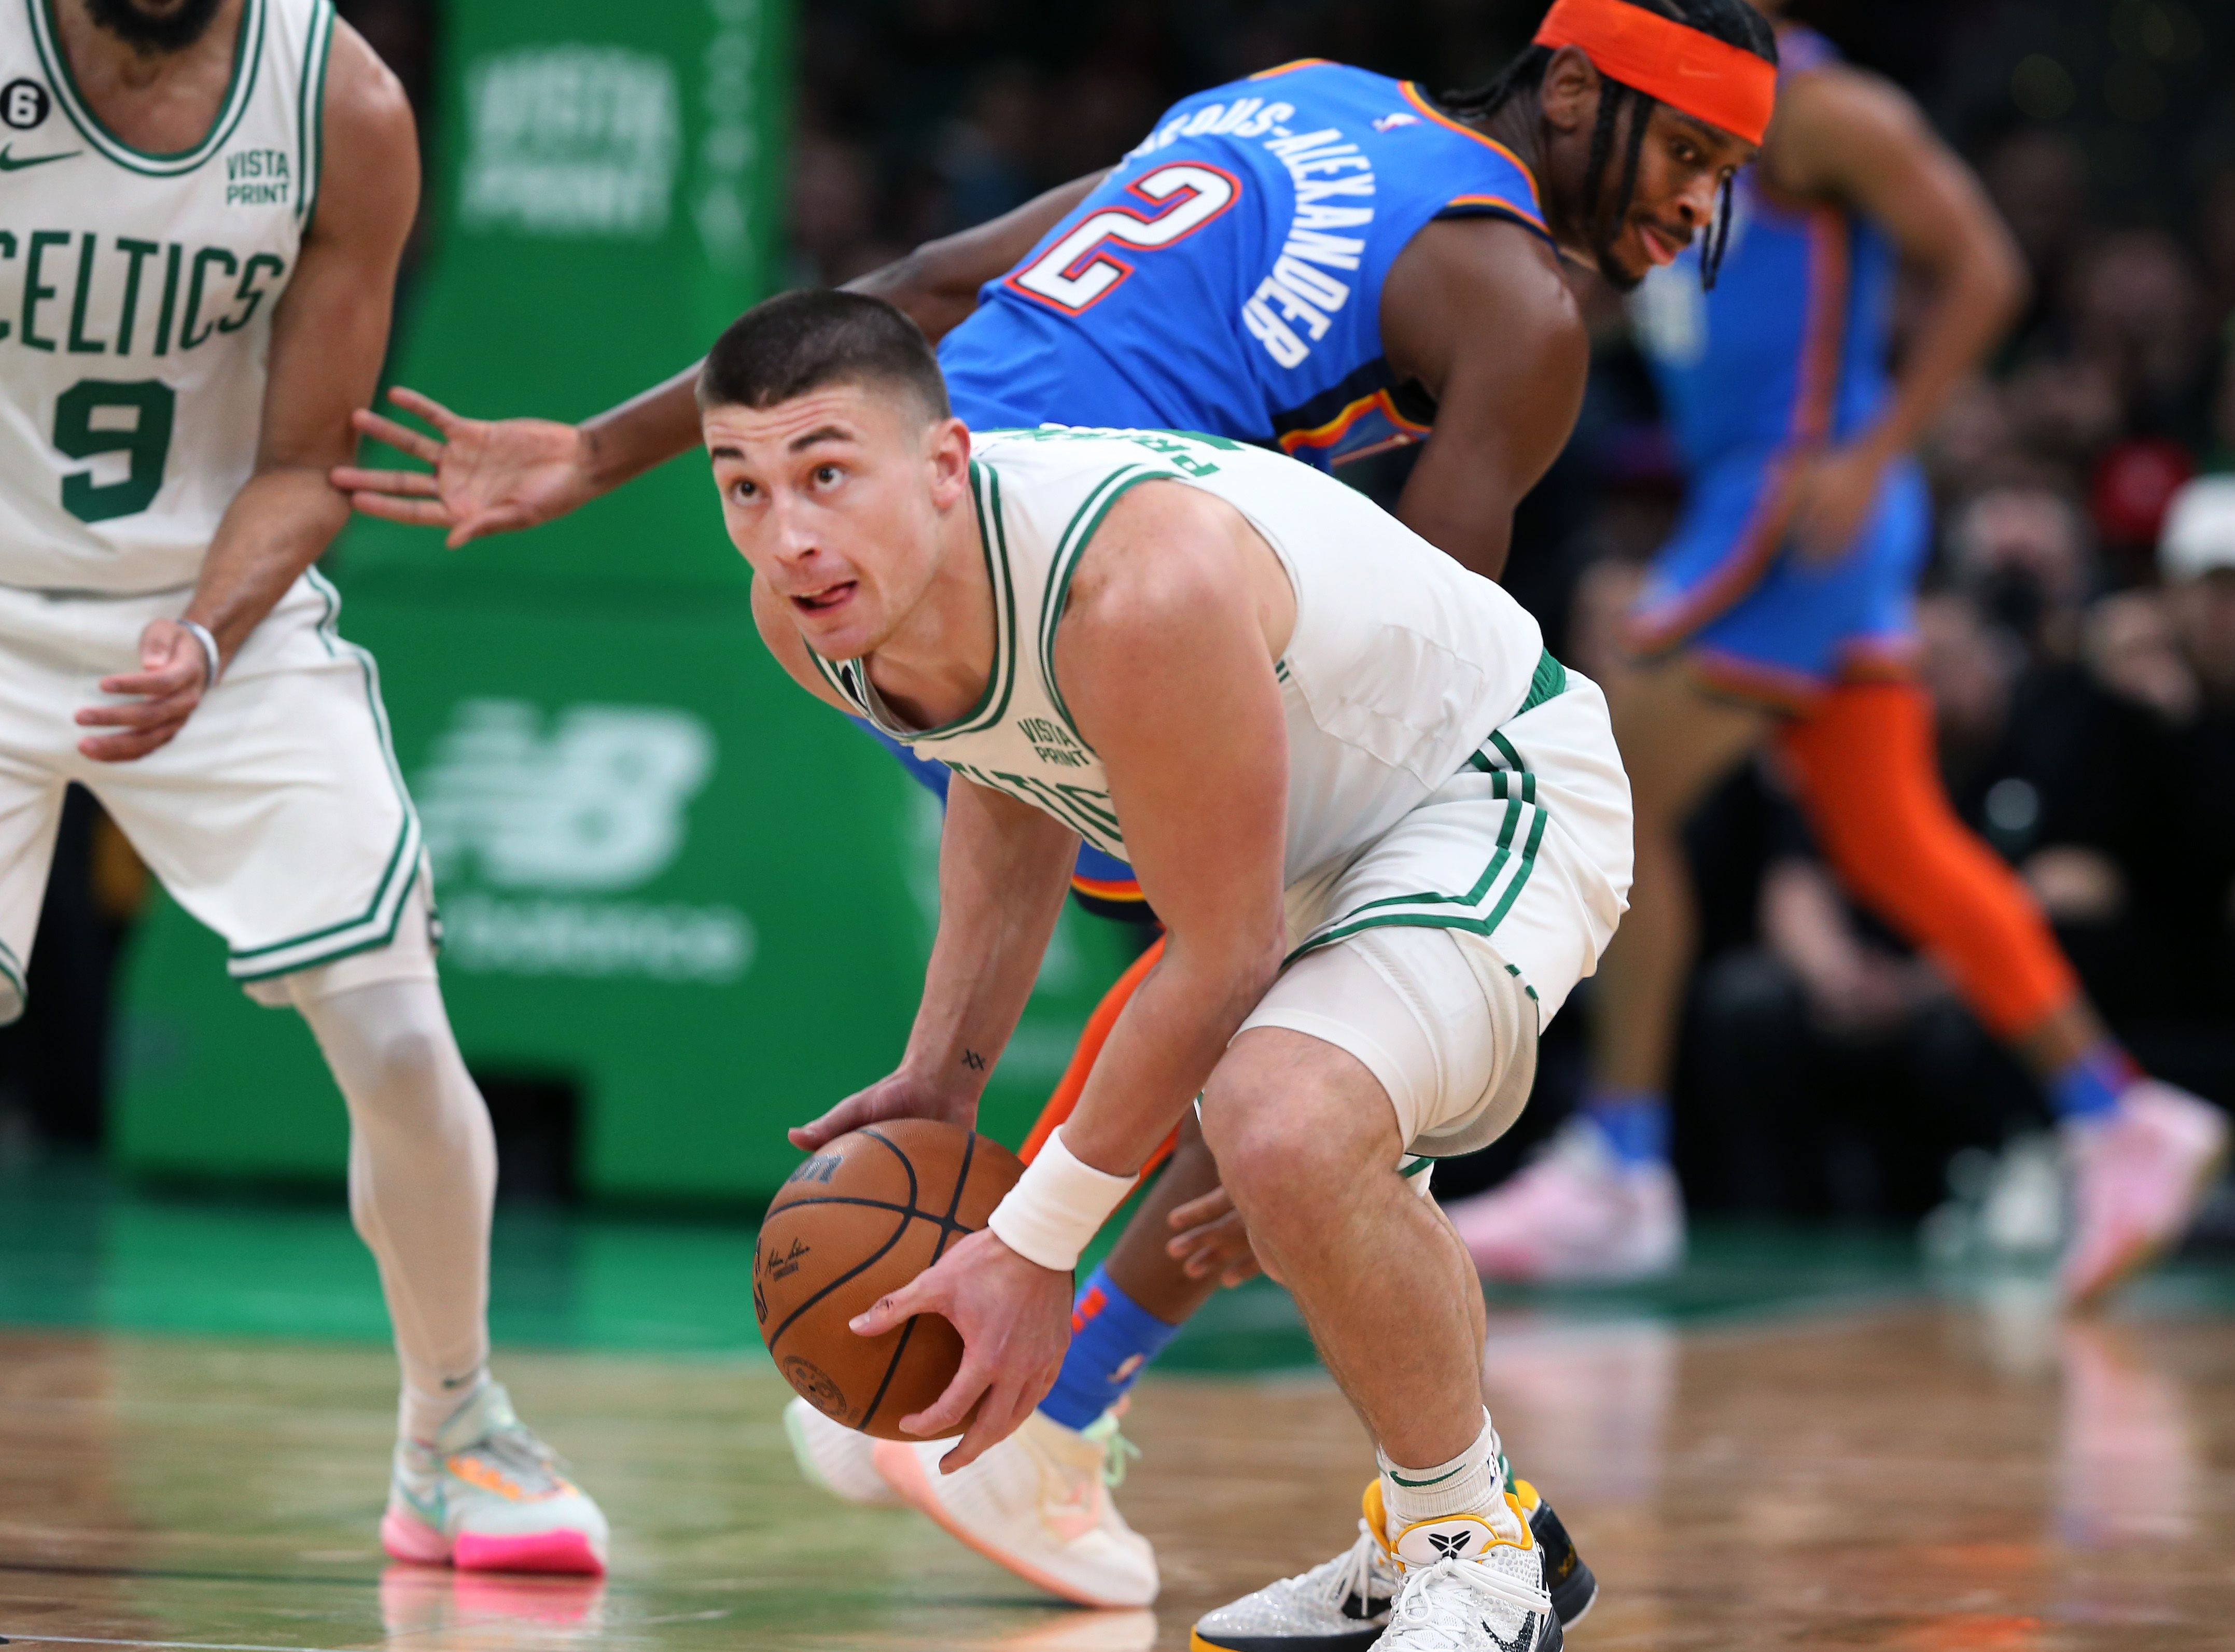 How Payton Pritchard Felt About Impactful Performance In Celtics' Win